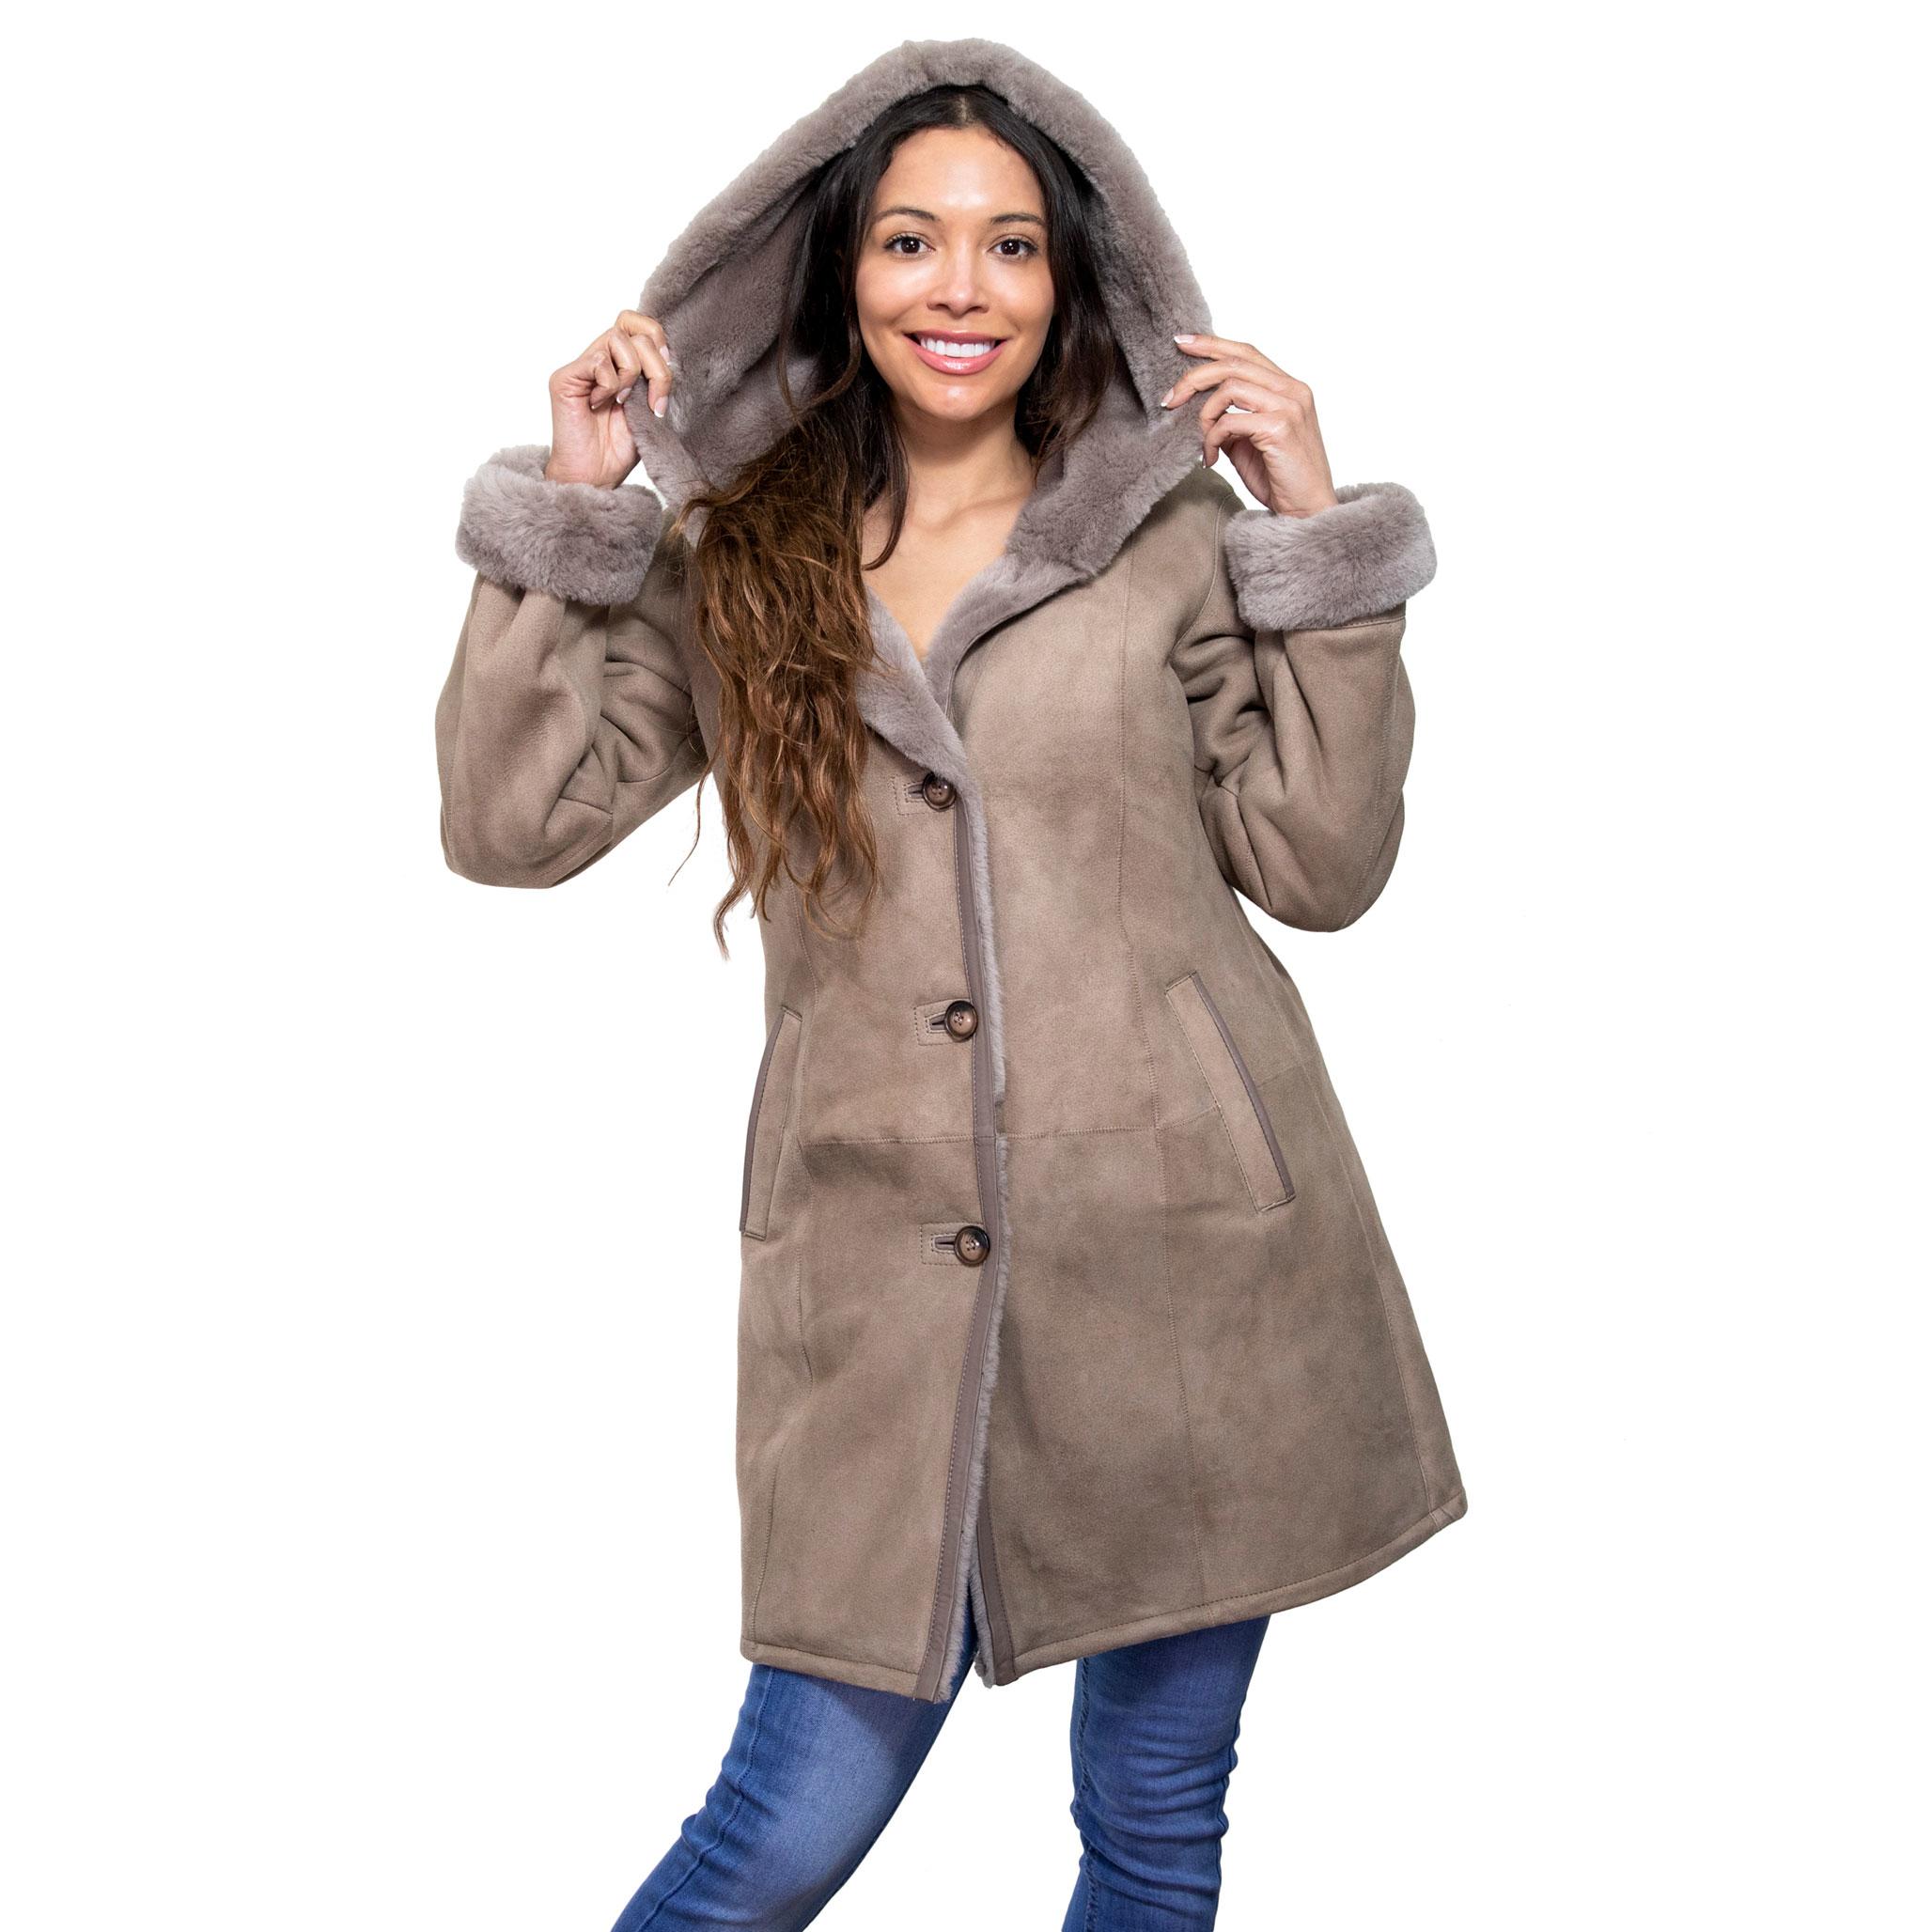 The model beams, as she cover her head with a hood. She is wearing a majestic sheepskin coat, with a suede finish in taupe. The interior is lined with soft opulent fur.